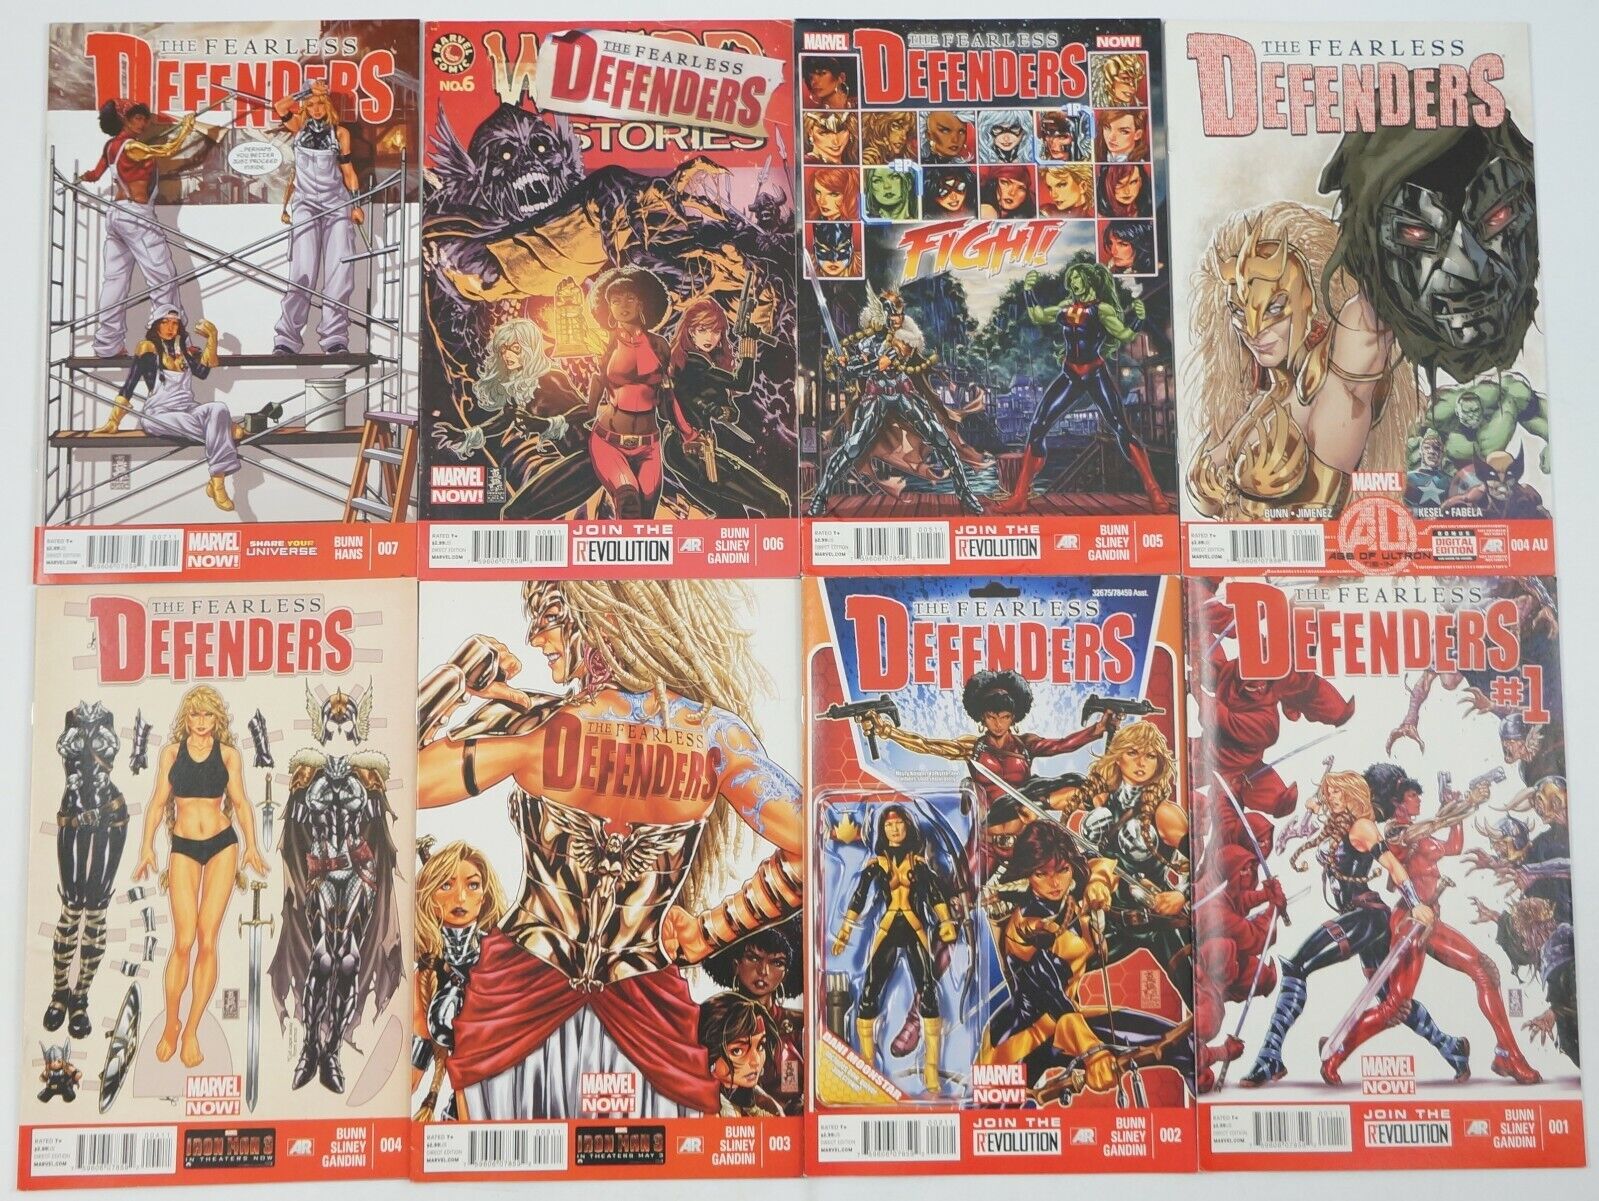 Fearless Defenders #1-12 VF/NM complete series + 4AU misty knight - valkyrie set